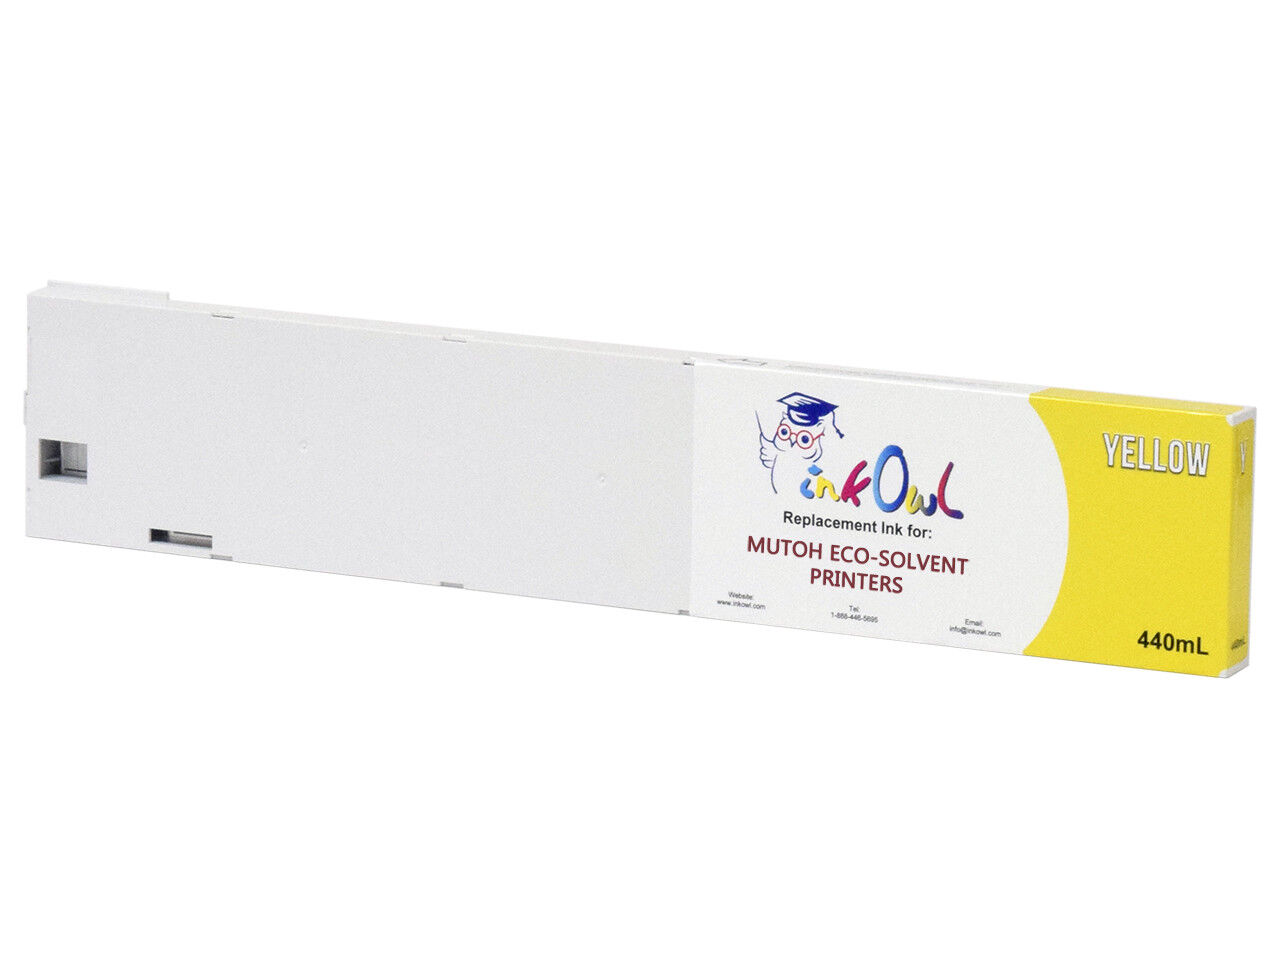 440ml InkOwl YELLOW Compatible Cartridge for Mutoh ValueJet Eco-Ultra Printers